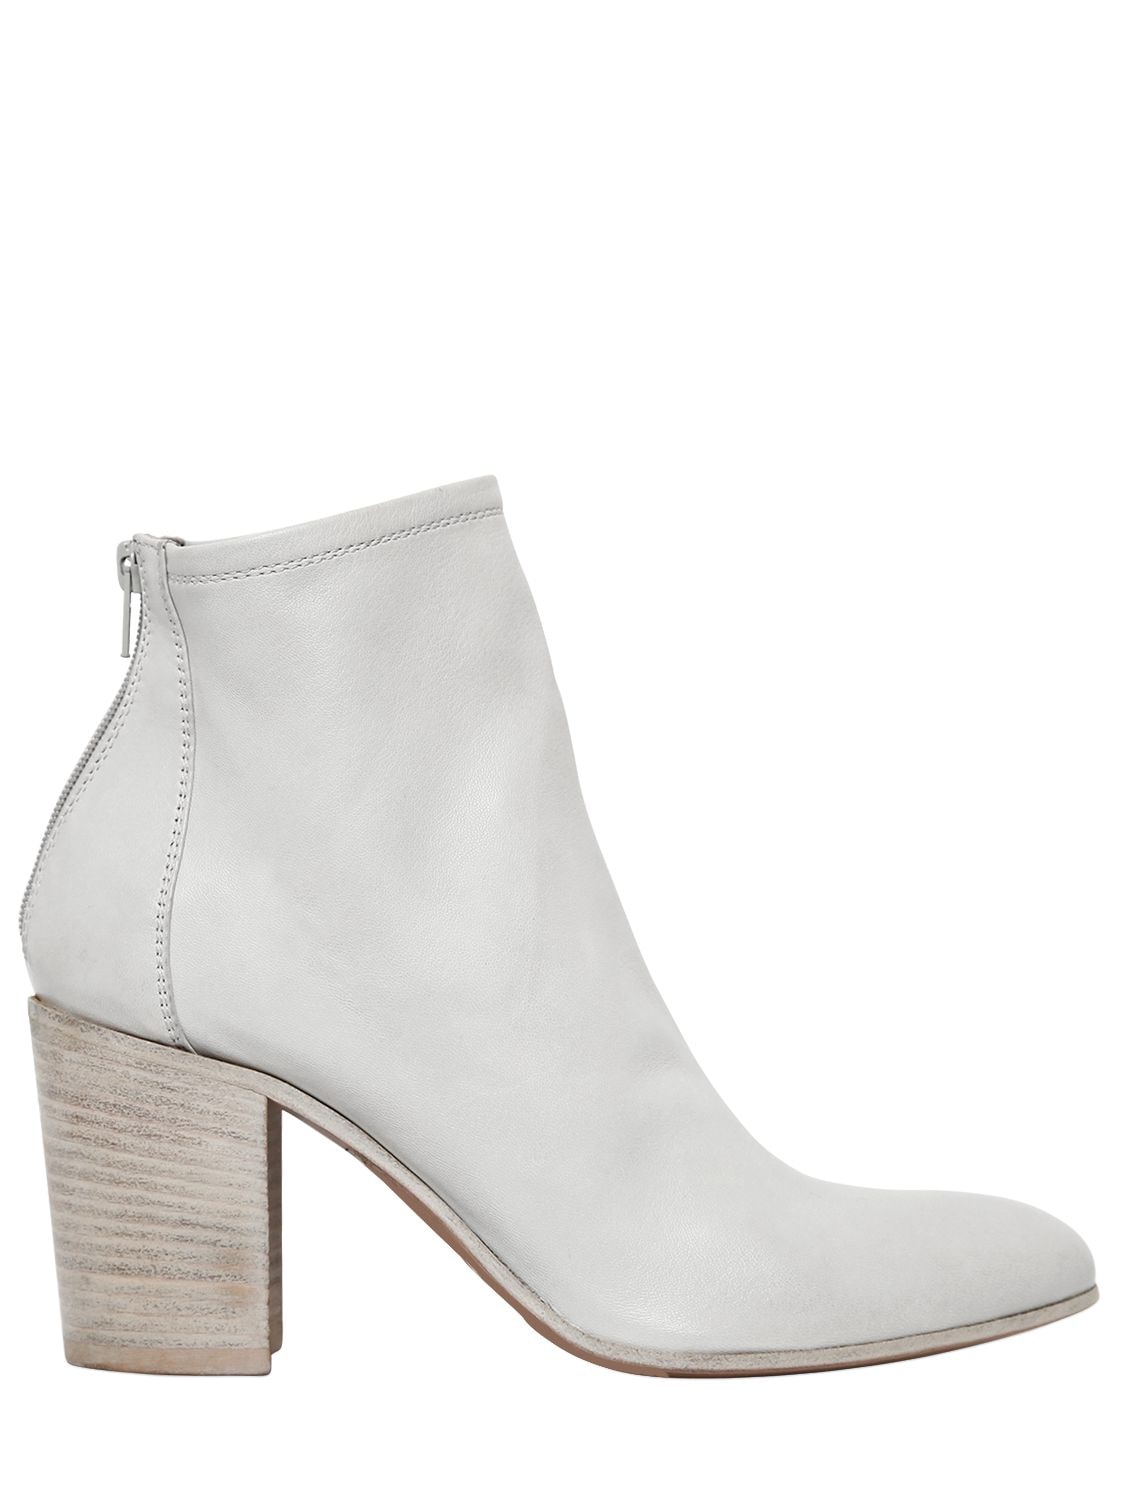 Strategia 70mm Leather Ankle Boots In Light Grey